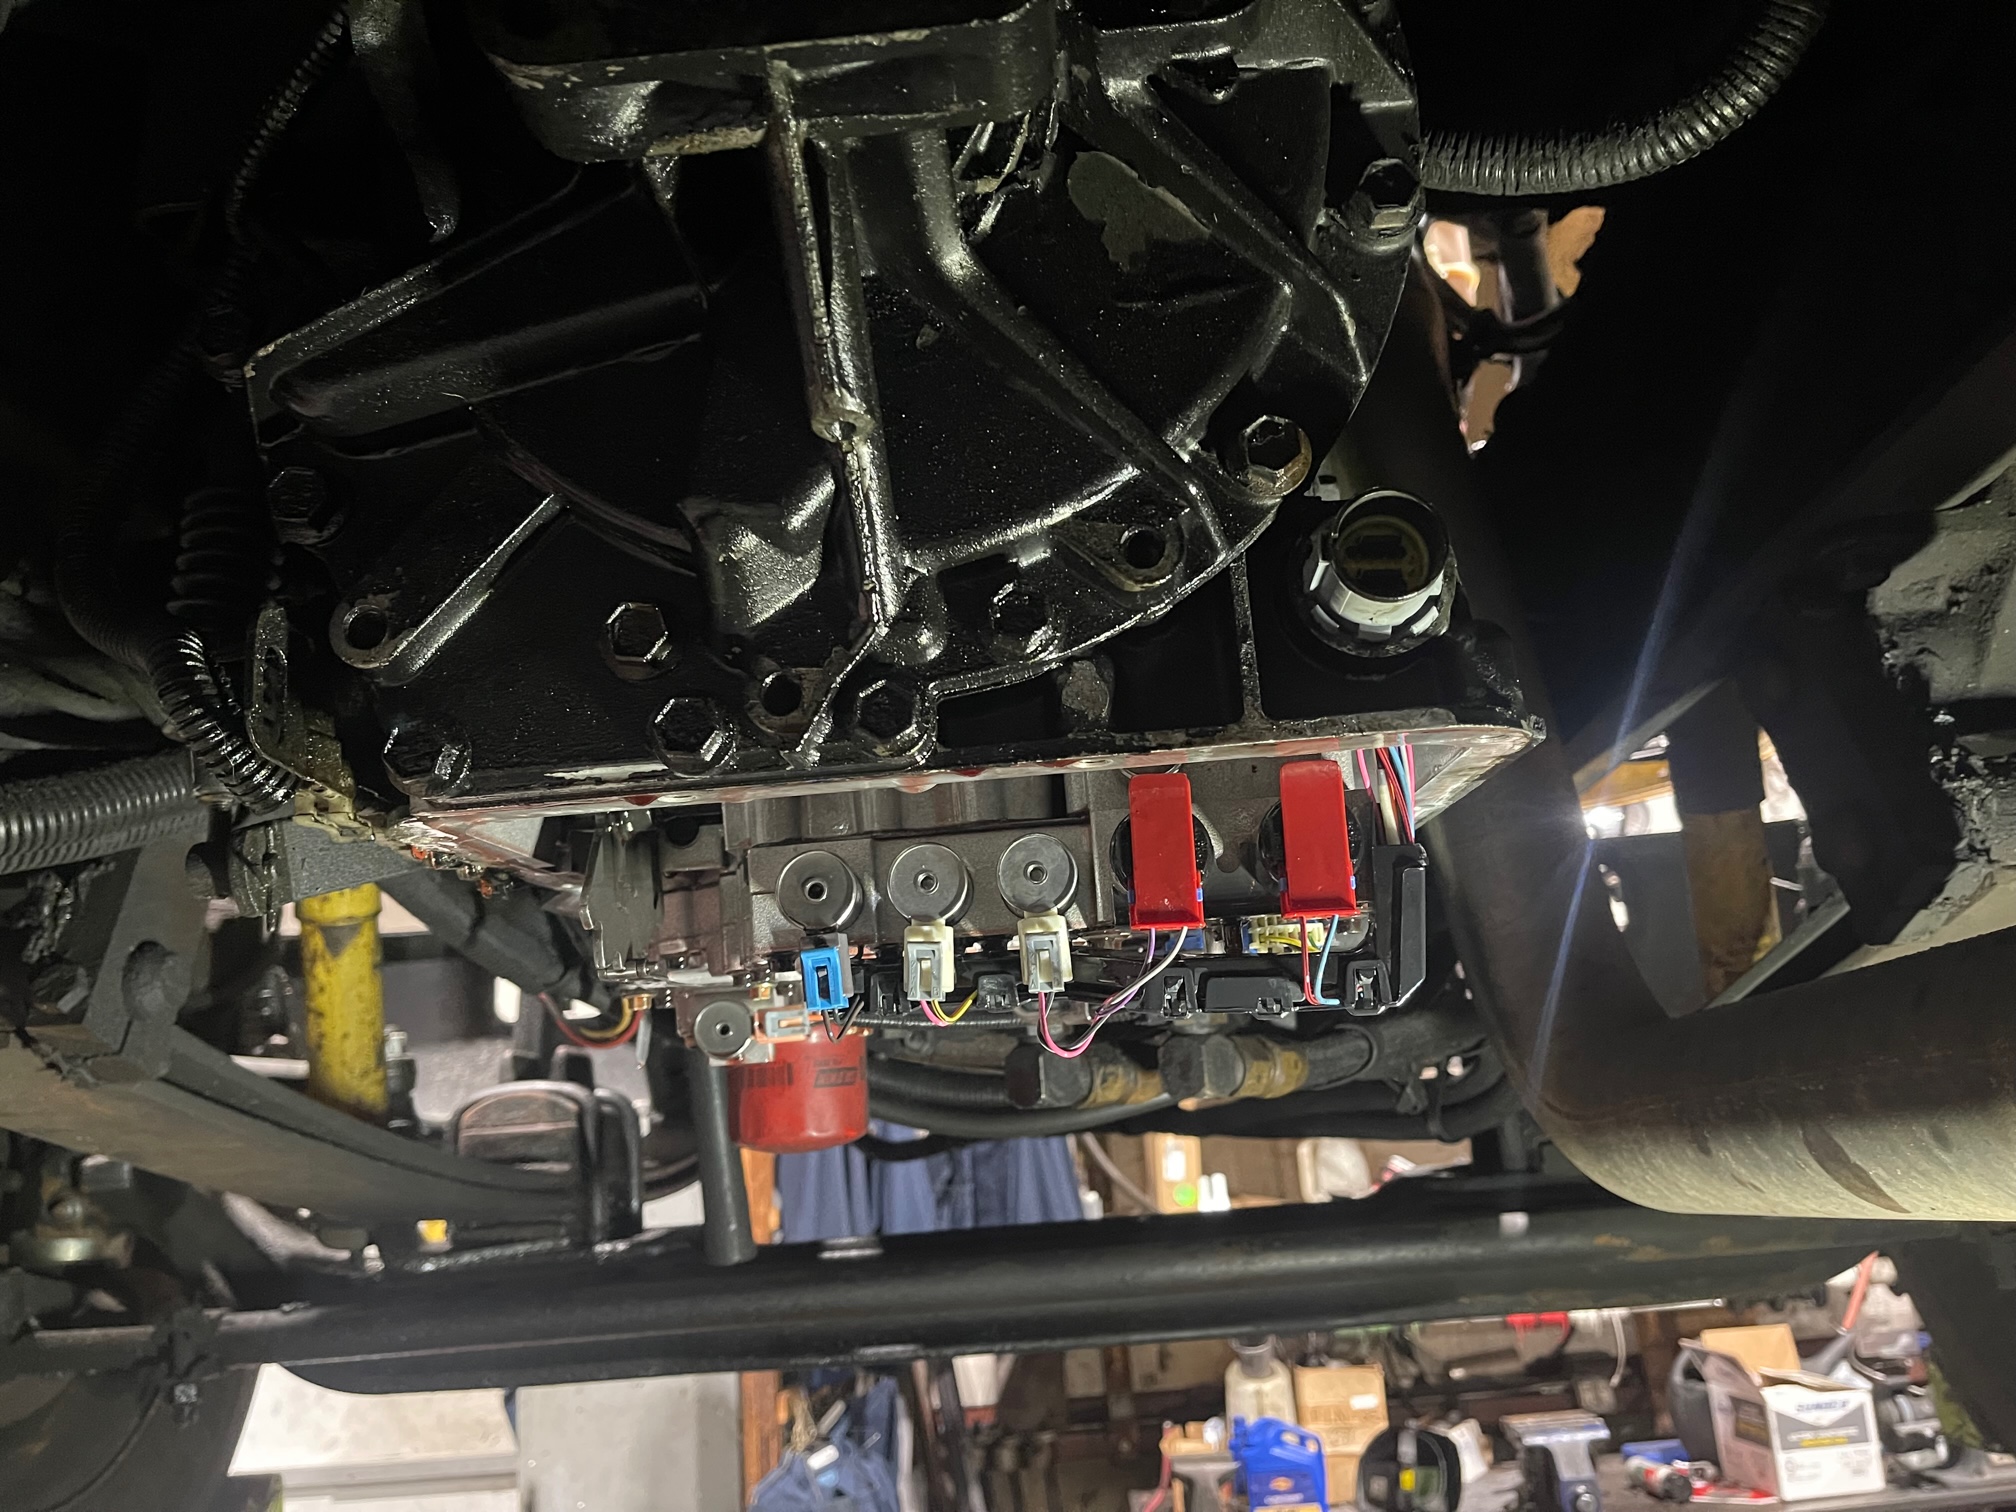 TJC Automotive Mobile Mechanic is your go-to for comprehensive auto repair services in Centereach, NY. From brakes and suspension to transmissions and more, our skilled technicians provide timely and efficient repairs to get you back on the road with confidence.